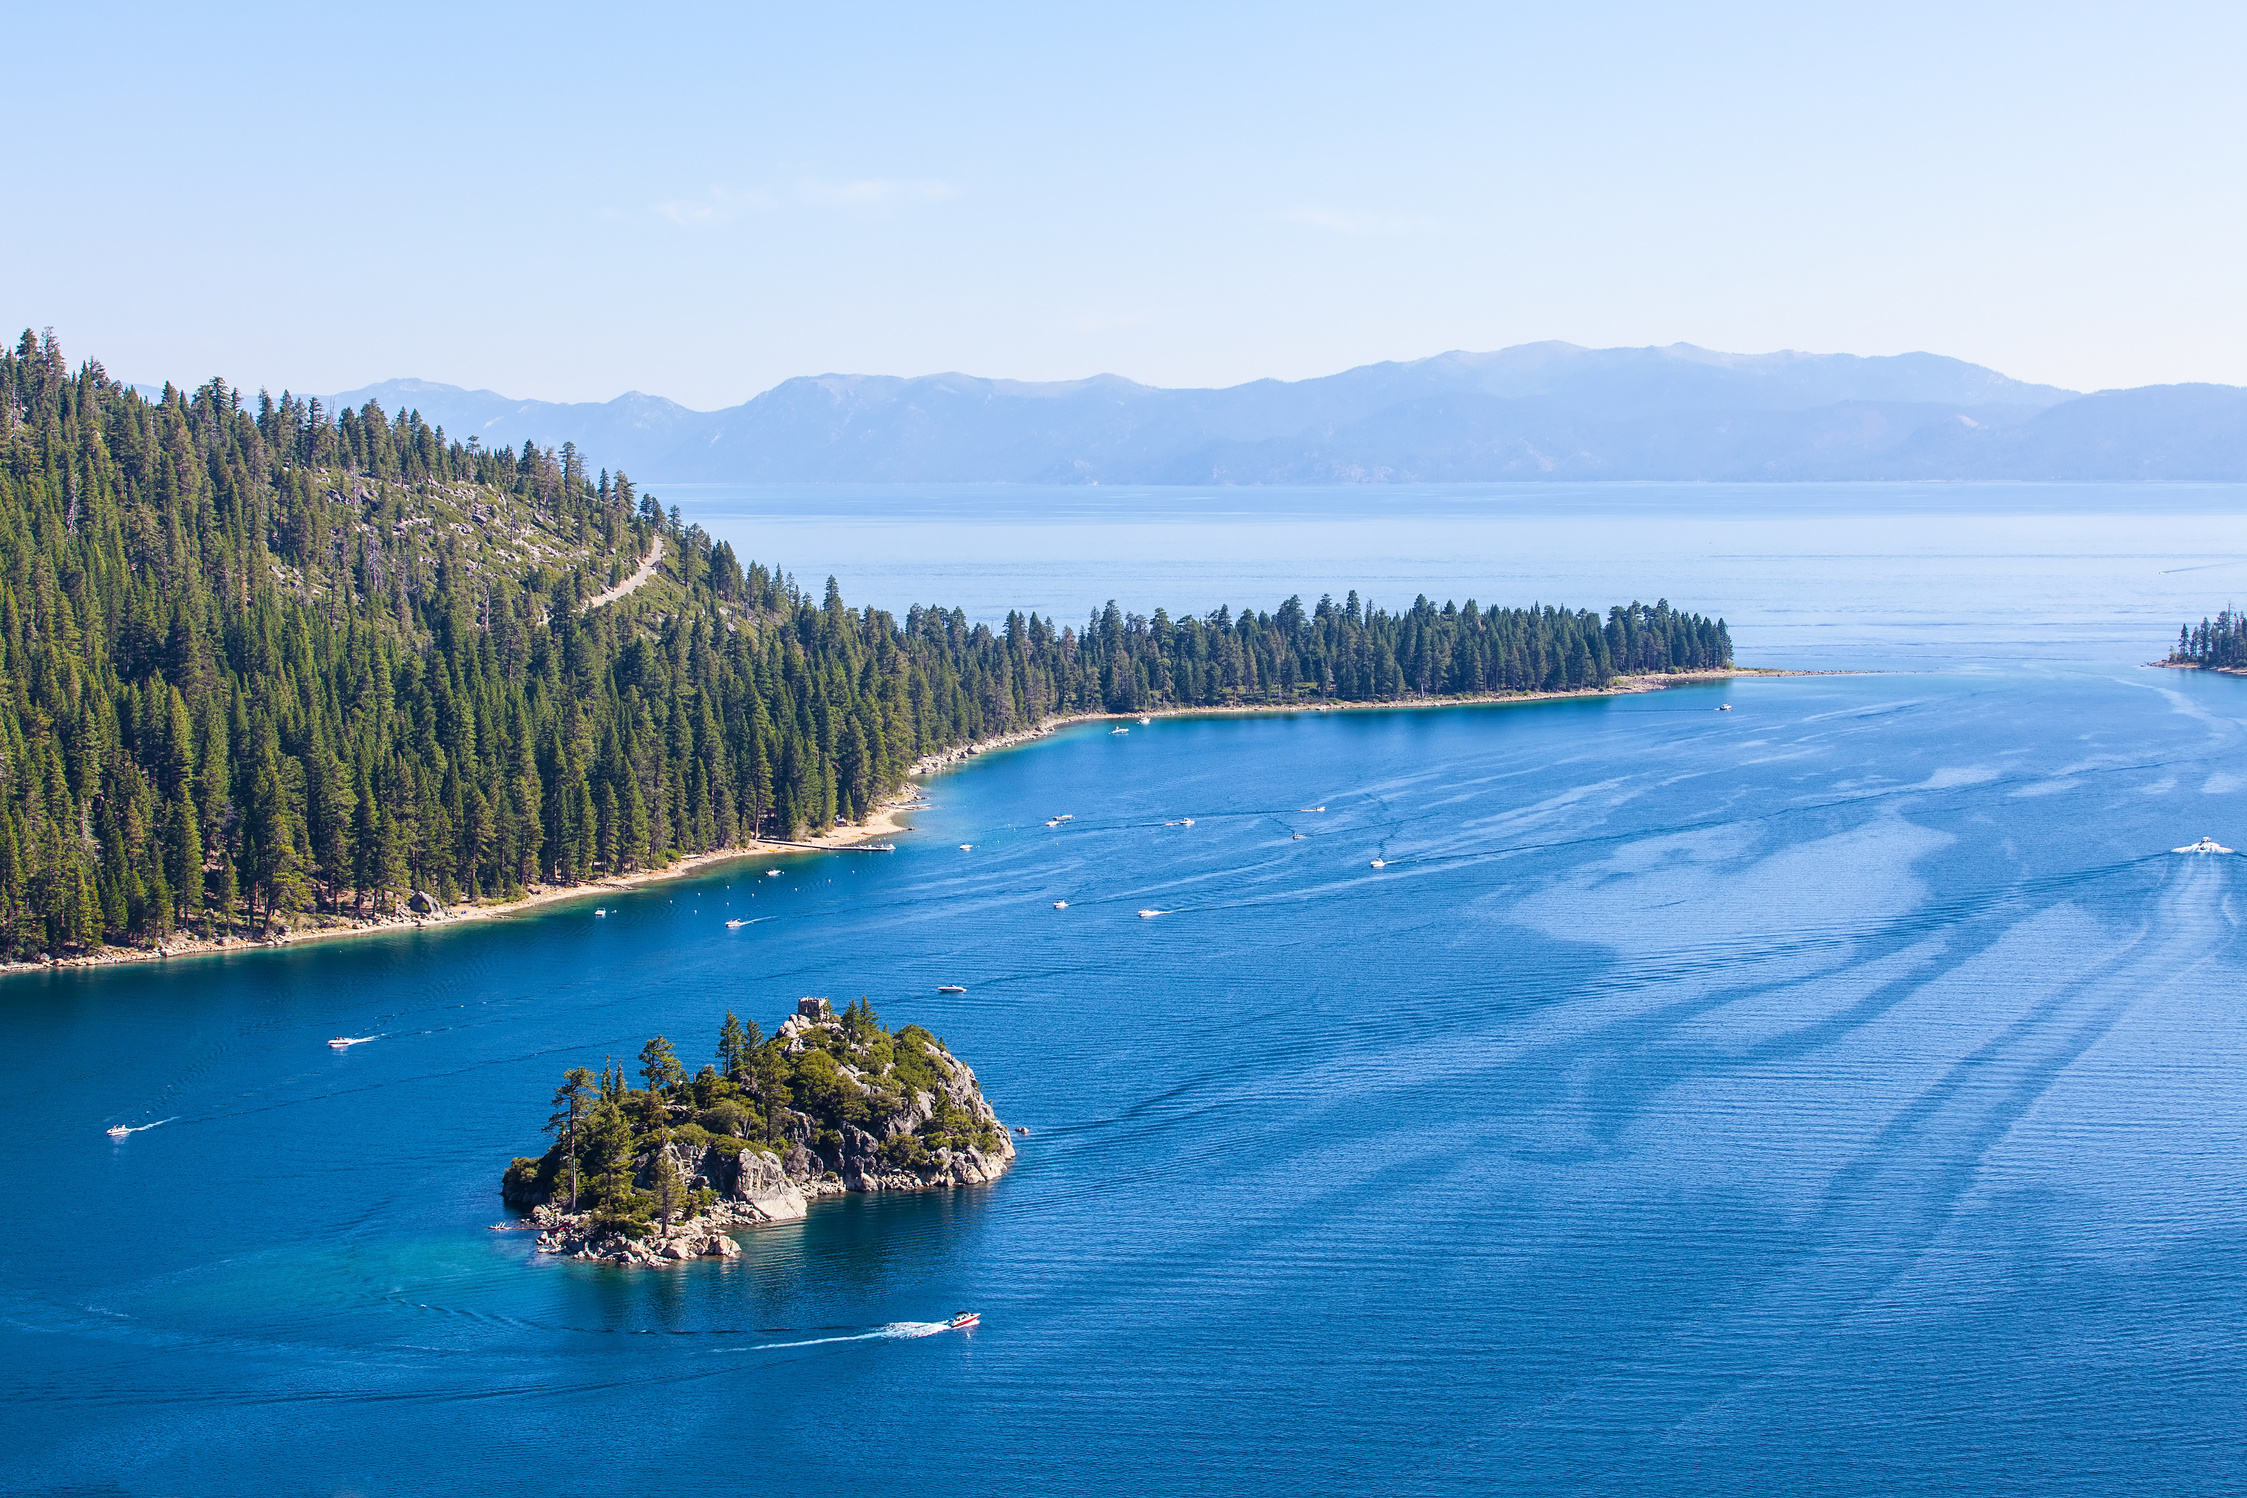 An aerial view of Lake Tahoe with blue water and evergreen trees growing along a hill. There's in island in the middle of the bay and a few boats in the water.